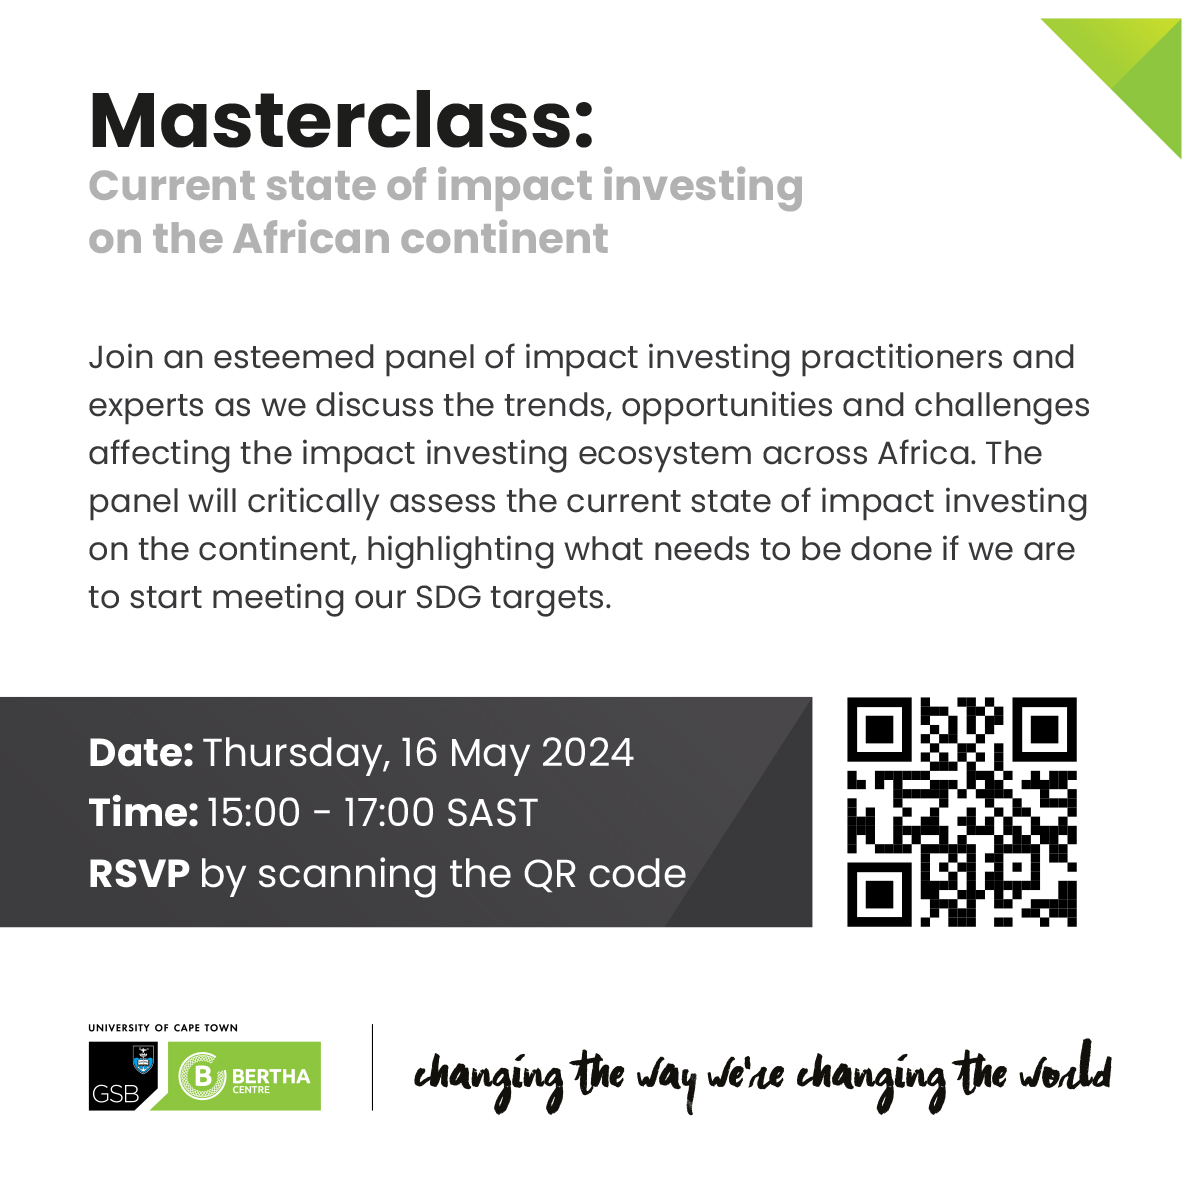 Masterclass: Current State of Impact Investing on the African Continent